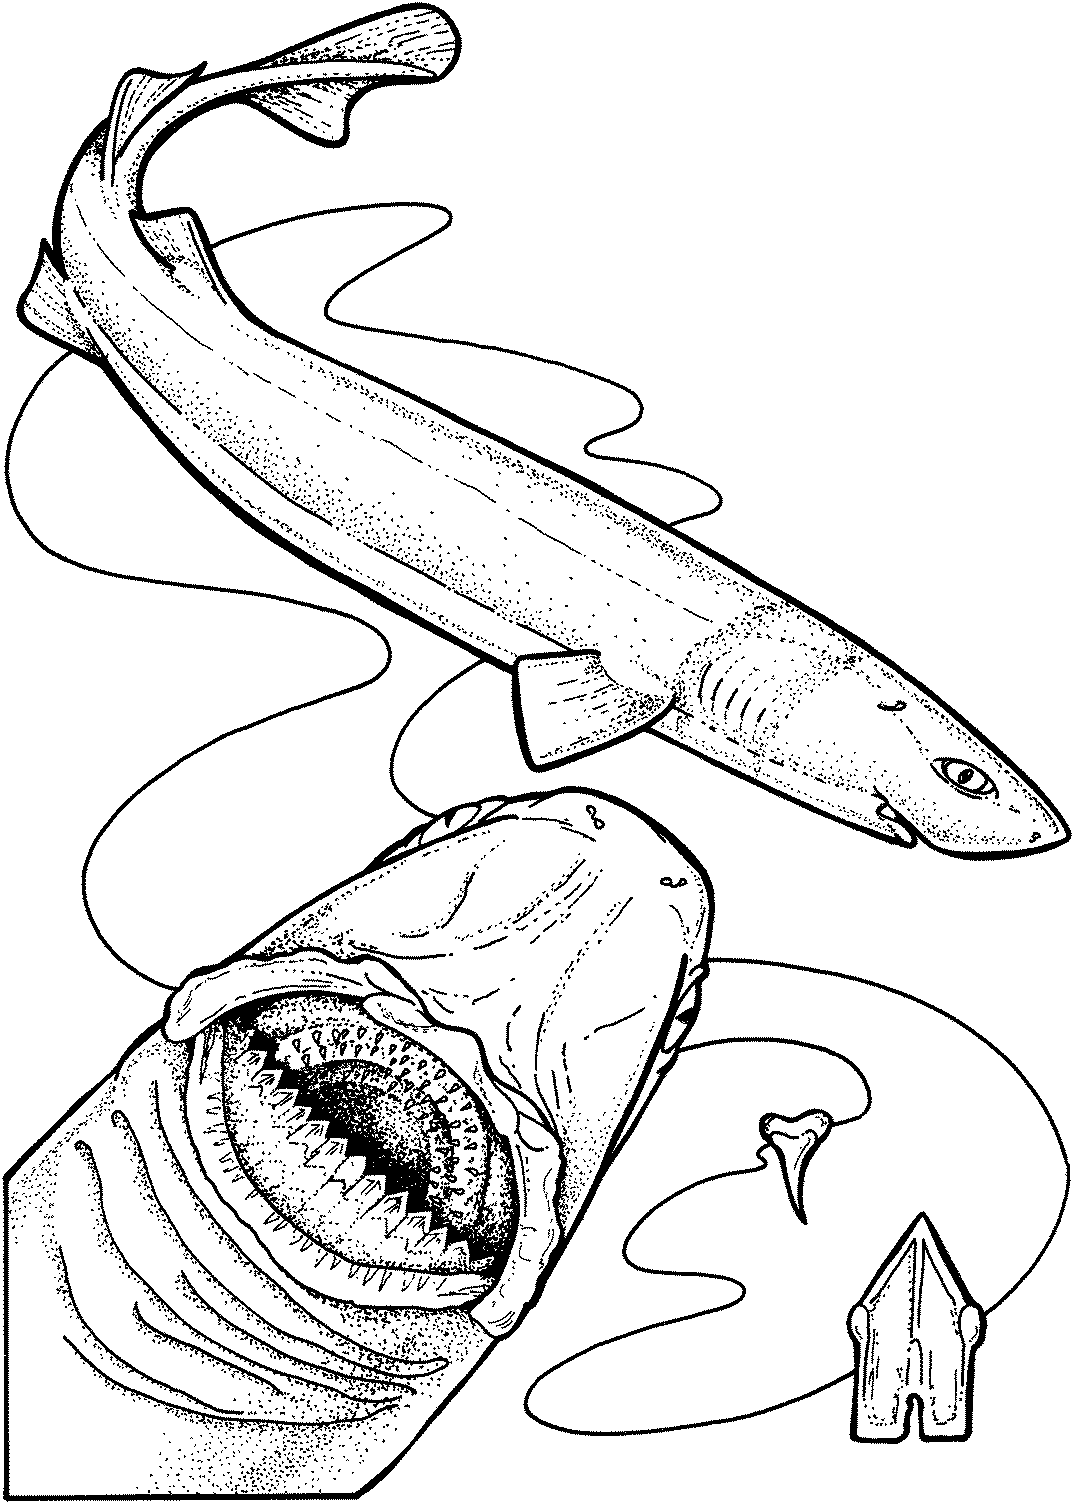 Shark Teeth Coloring Pages